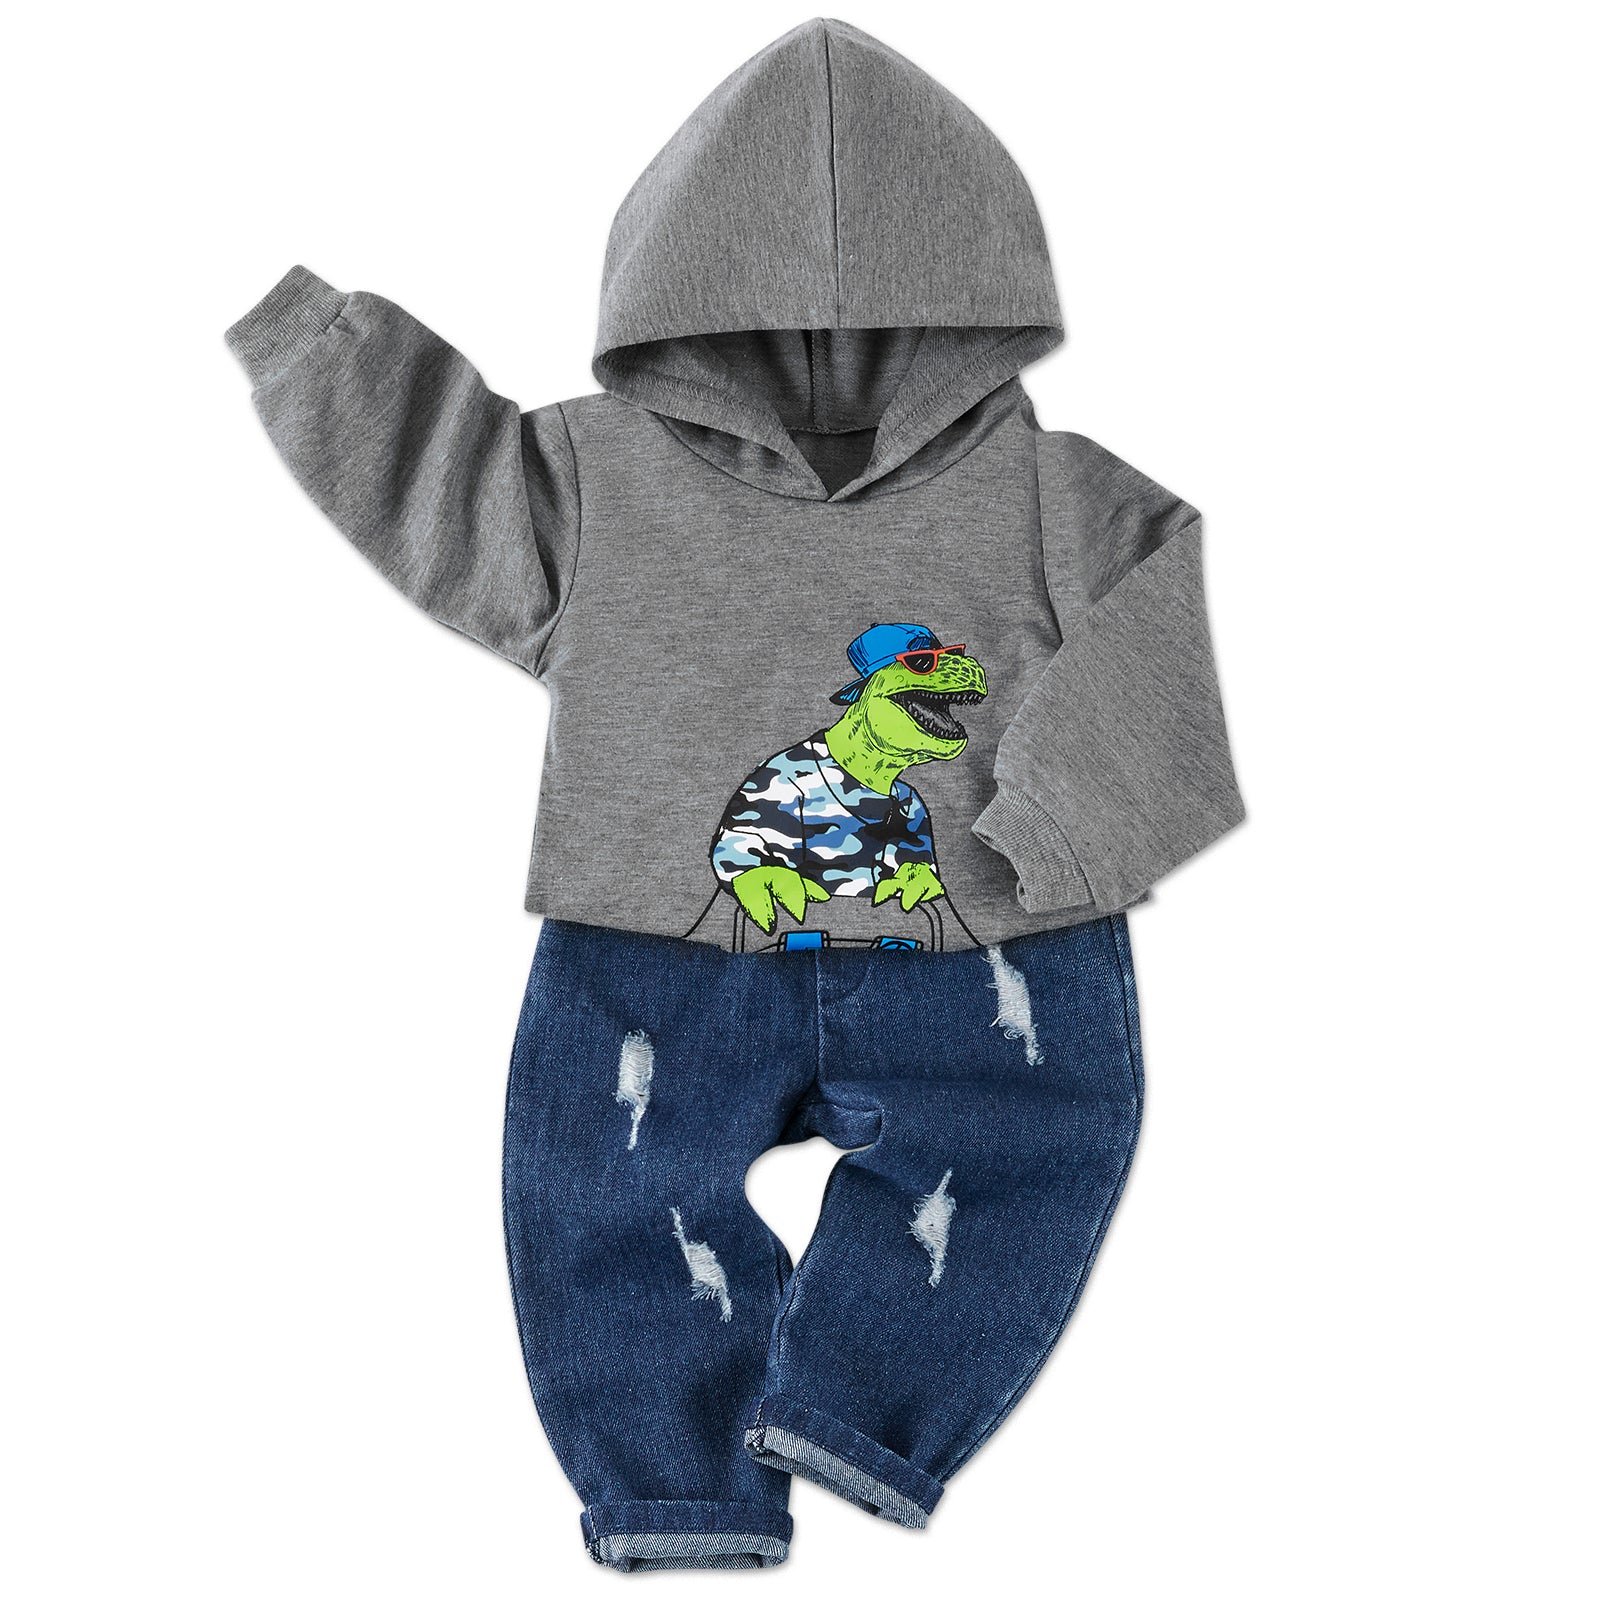  Infant Children Kids Toddler Baby Girls Boys Long Sleeve Cute  Animals Hoodie Sweatshirt Pullover Tops Cotton Trousers Pants Outfit Set  2PCS Clothes Dinosaur Shirts for Boys (Light Blue, 2-3 Years) 